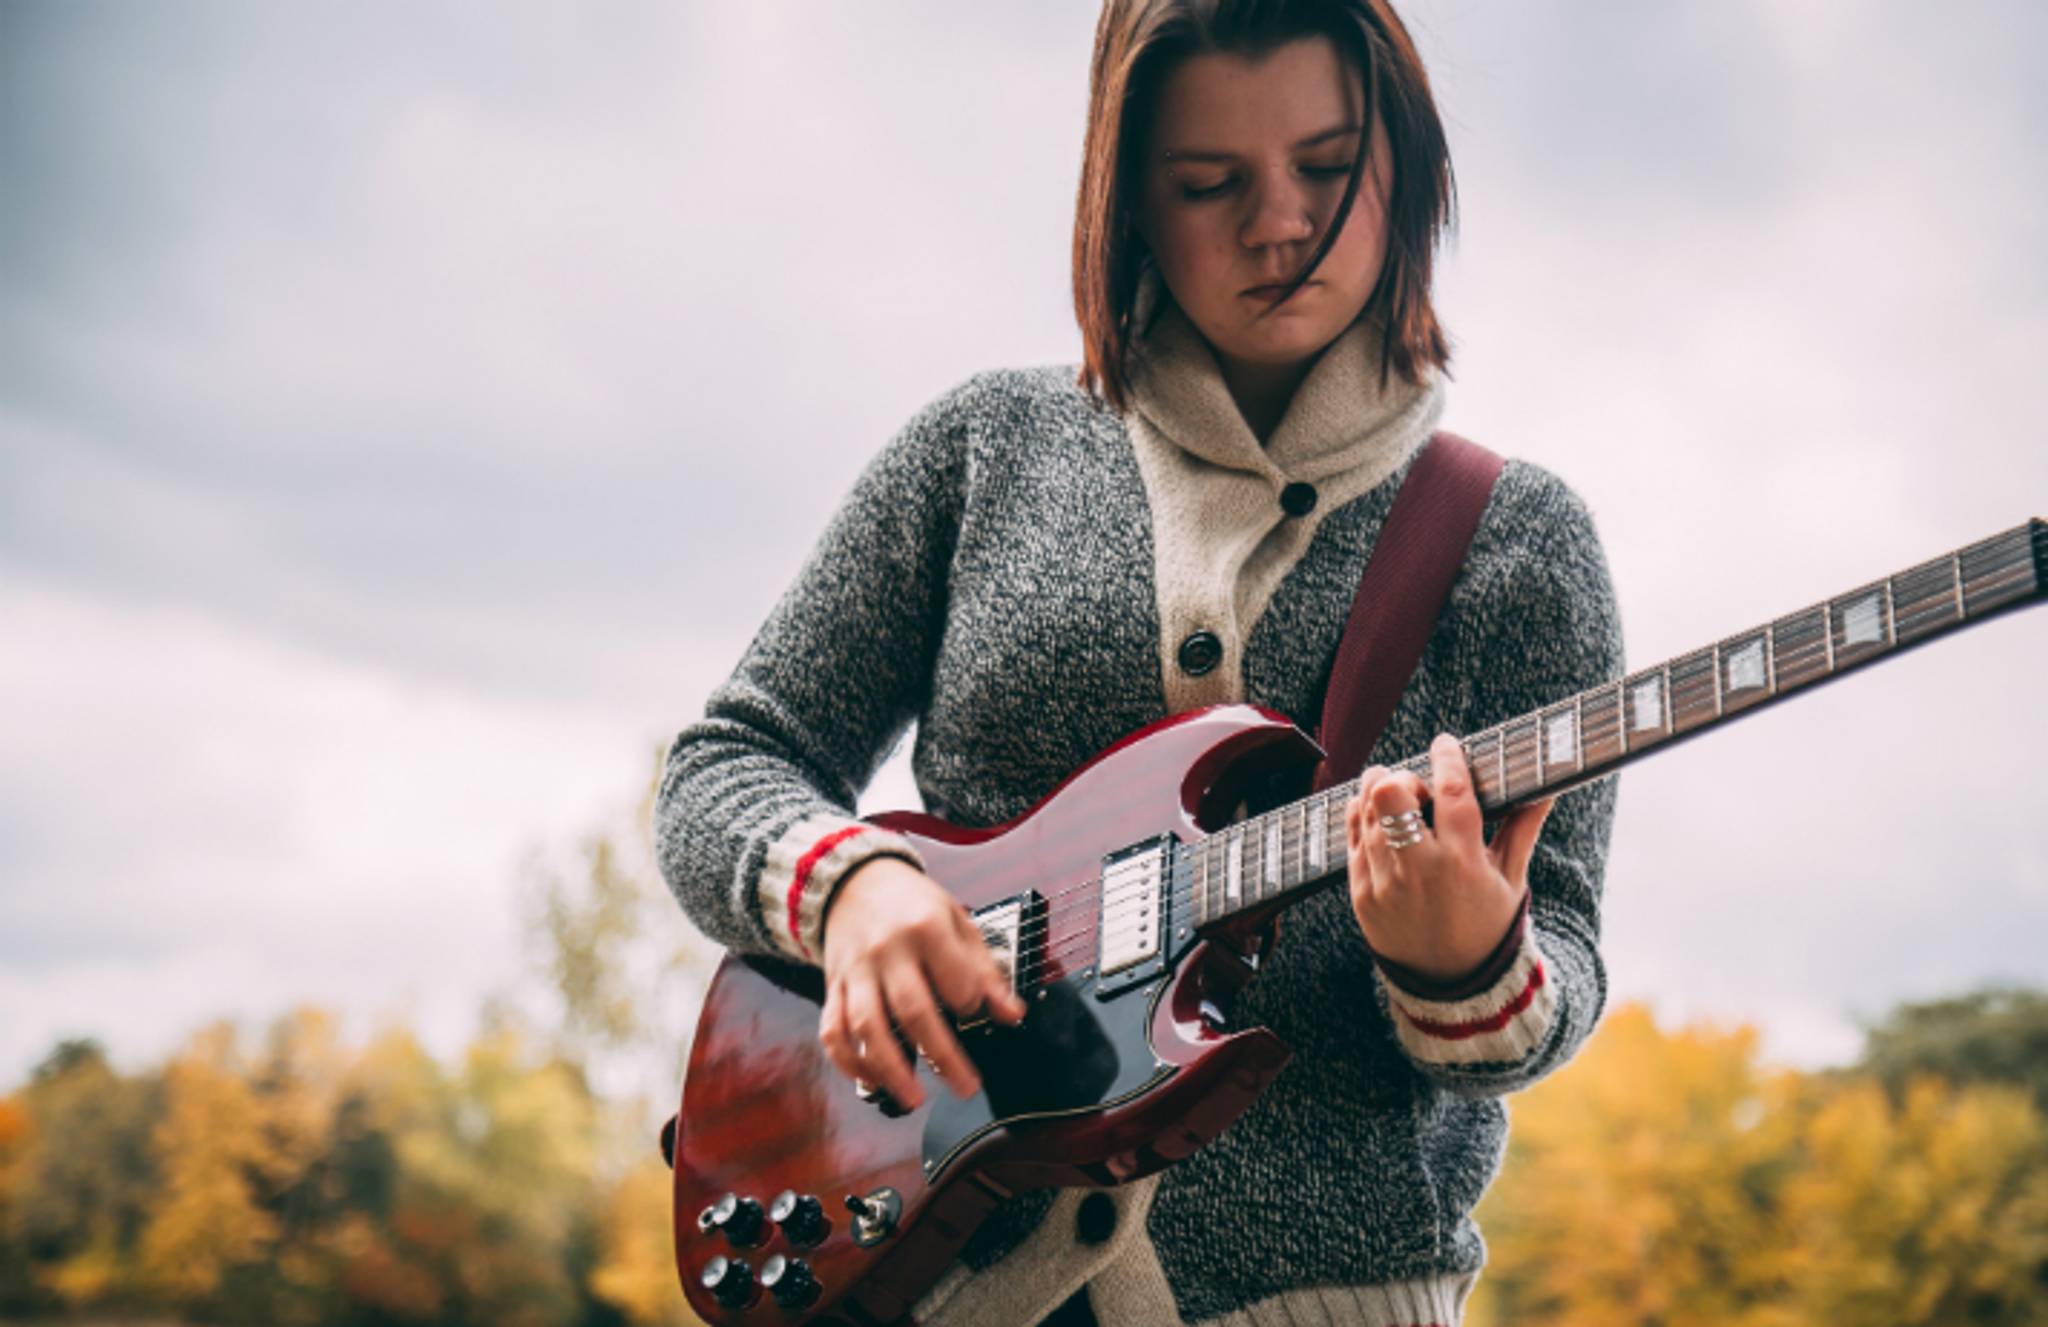 She Shreds: a music mag tearing up guitar culture